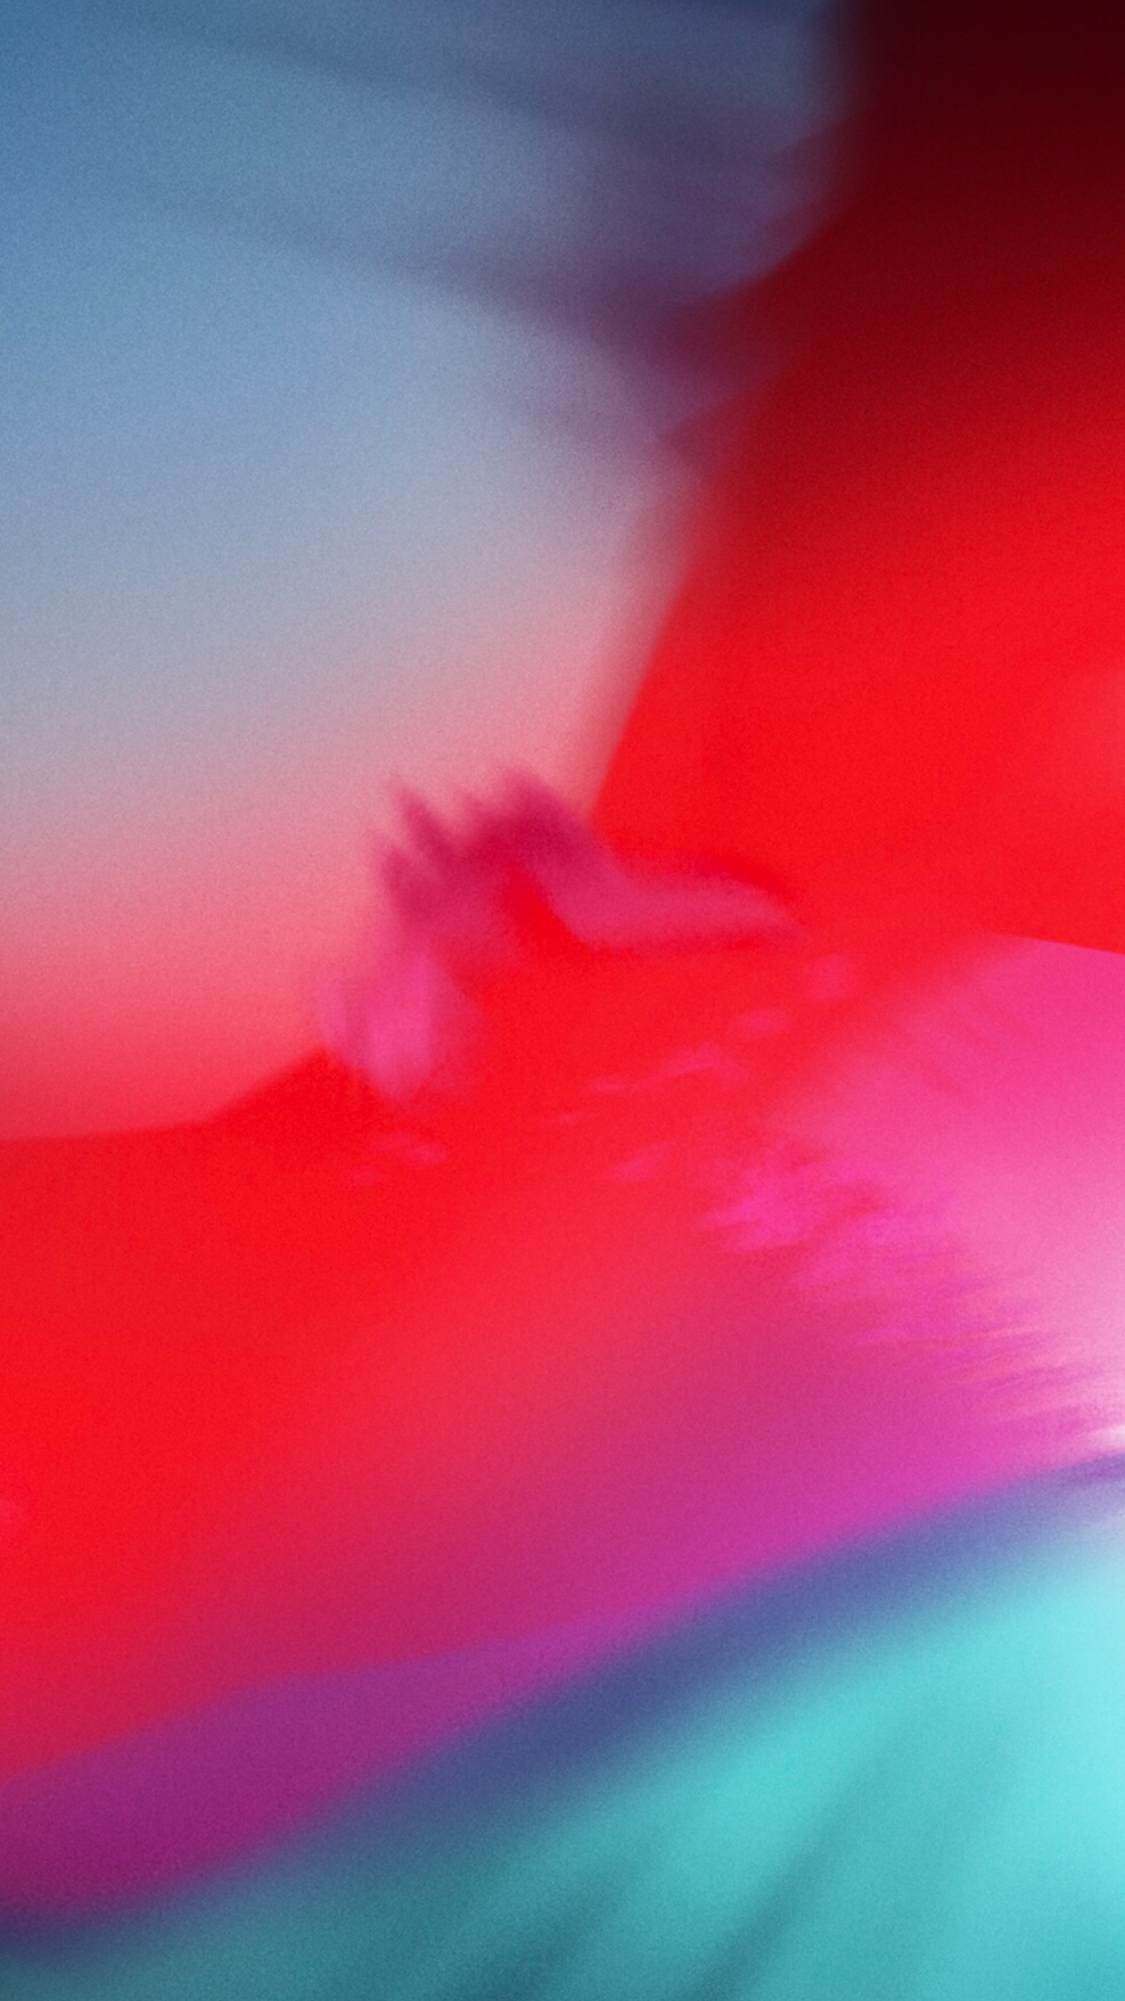 iOS 12 official wallpaper. iPhone wallpaper photography, iPhone